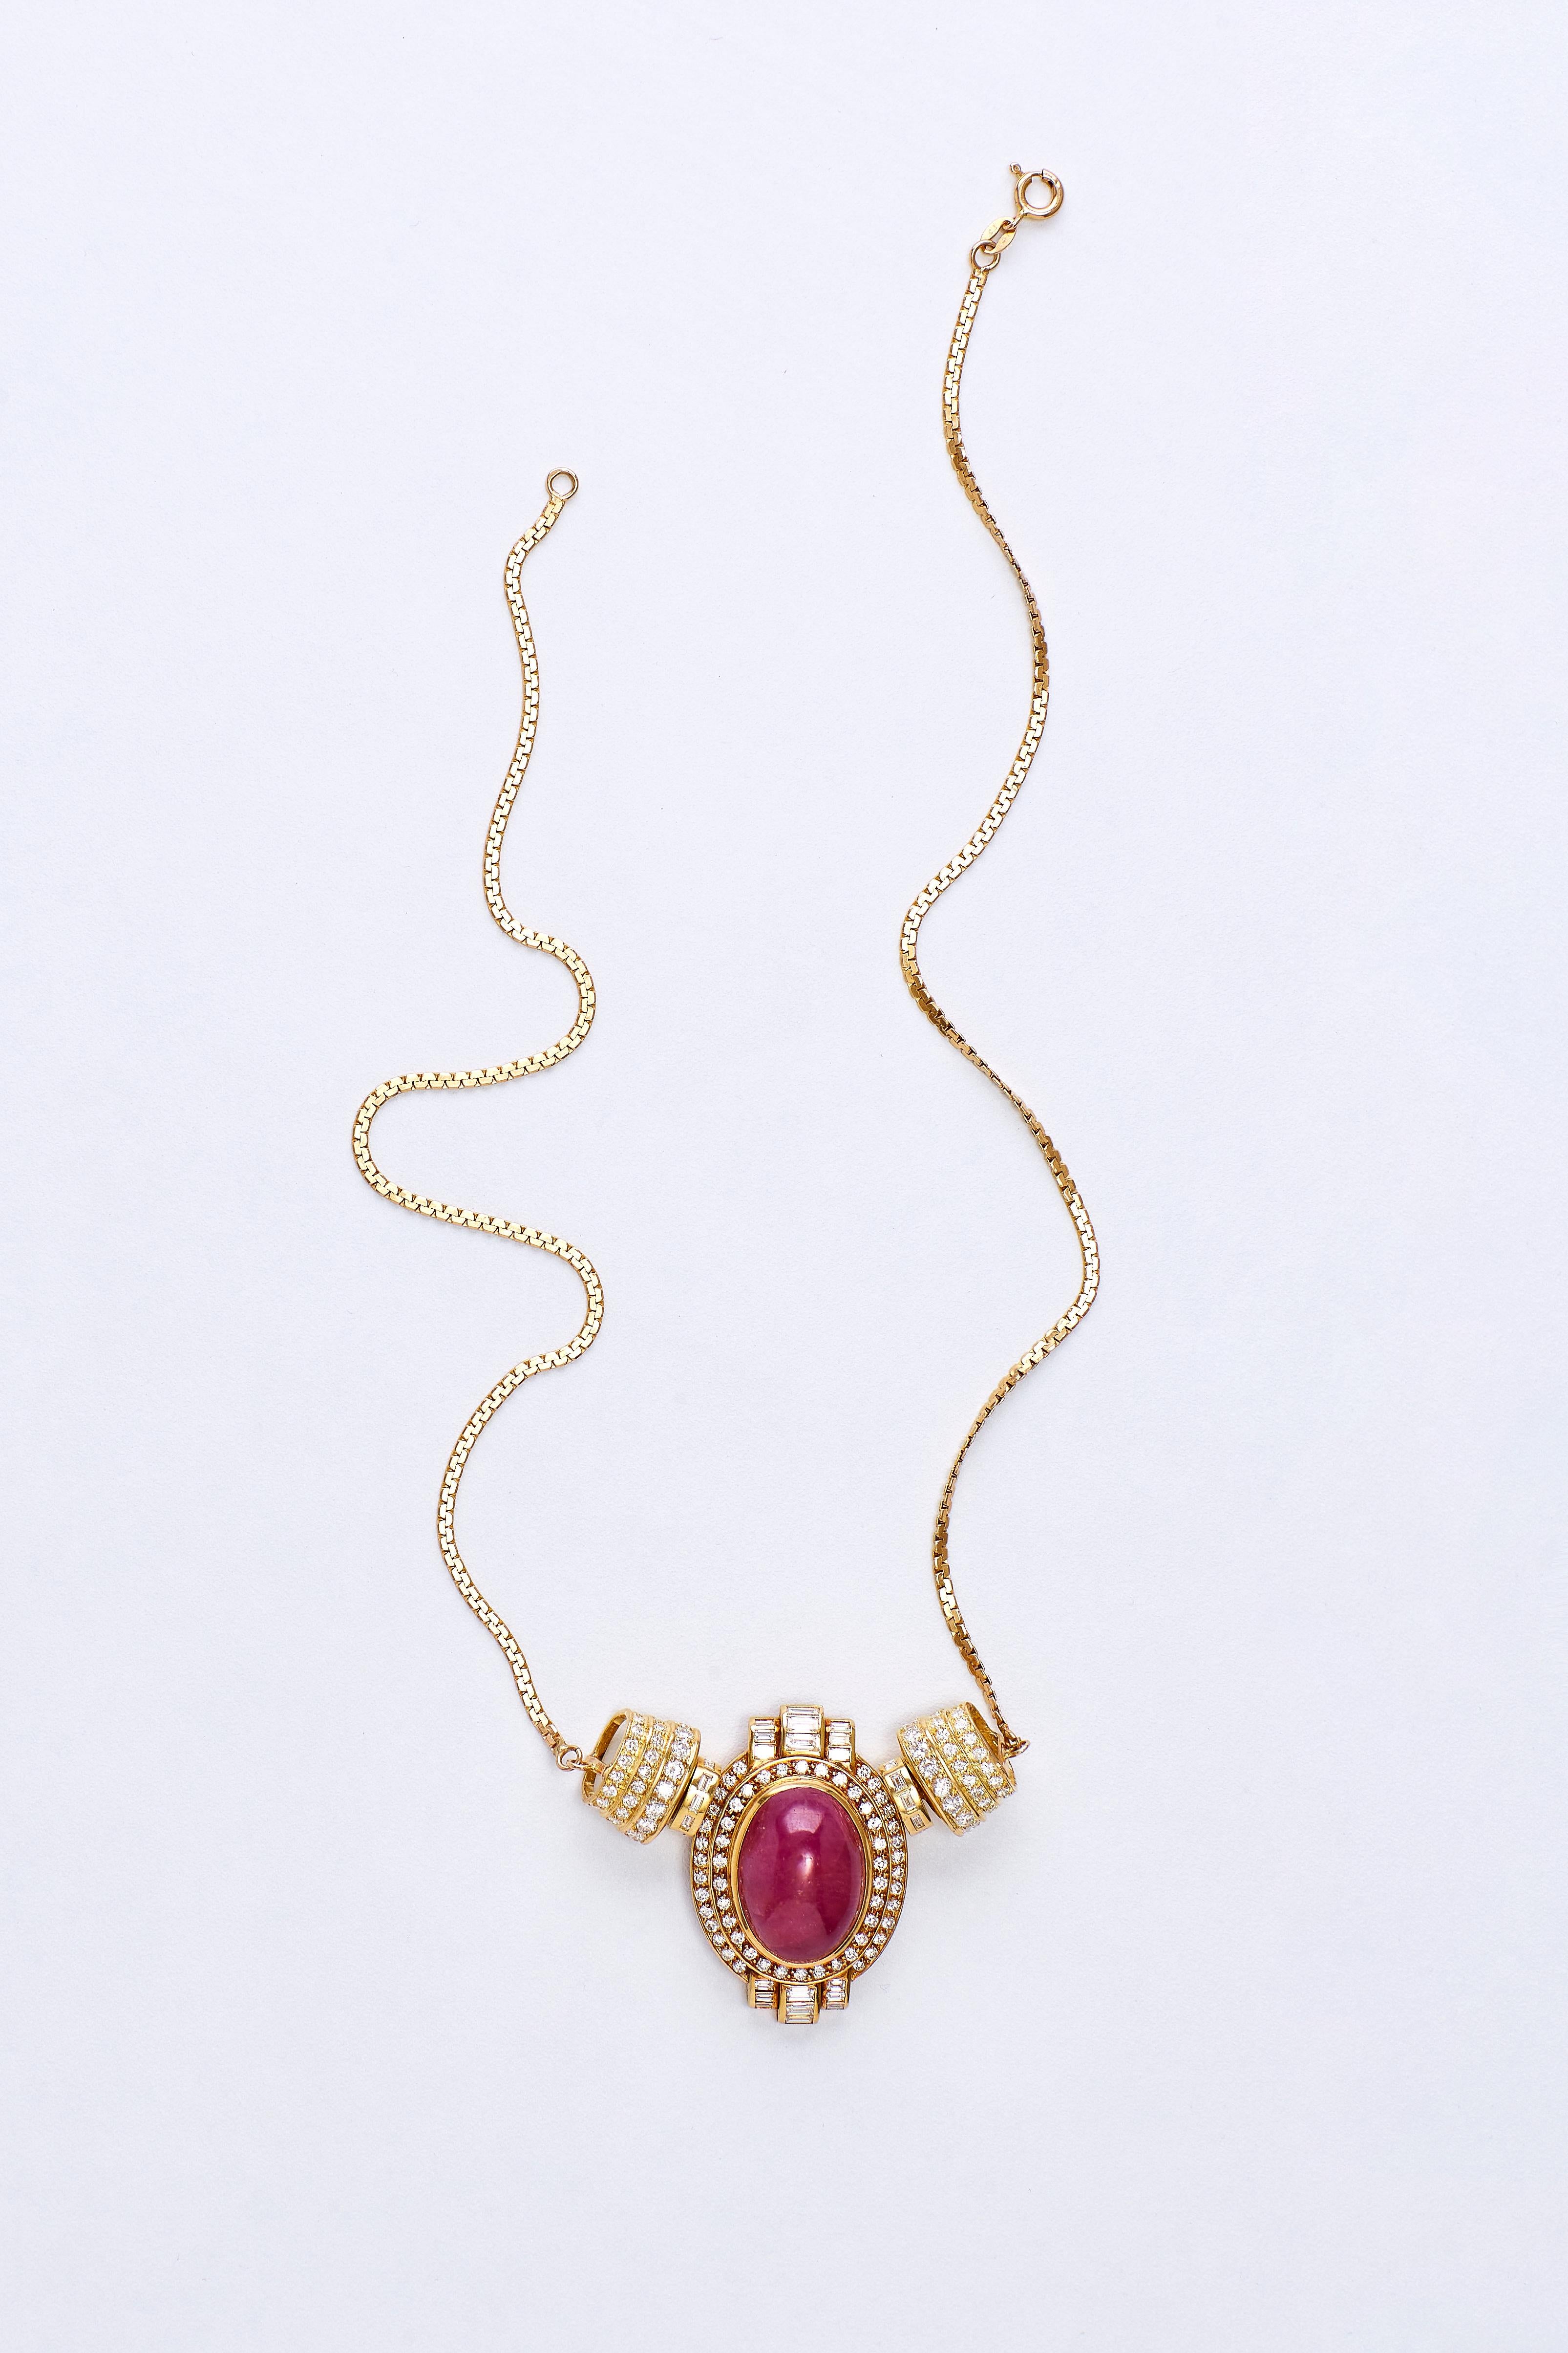 Set of 14 Karat Gold, Ruby and Diamonds Pendant with Chain and Earrings In Excellent Condition For Sale In Tel Aviv, IL